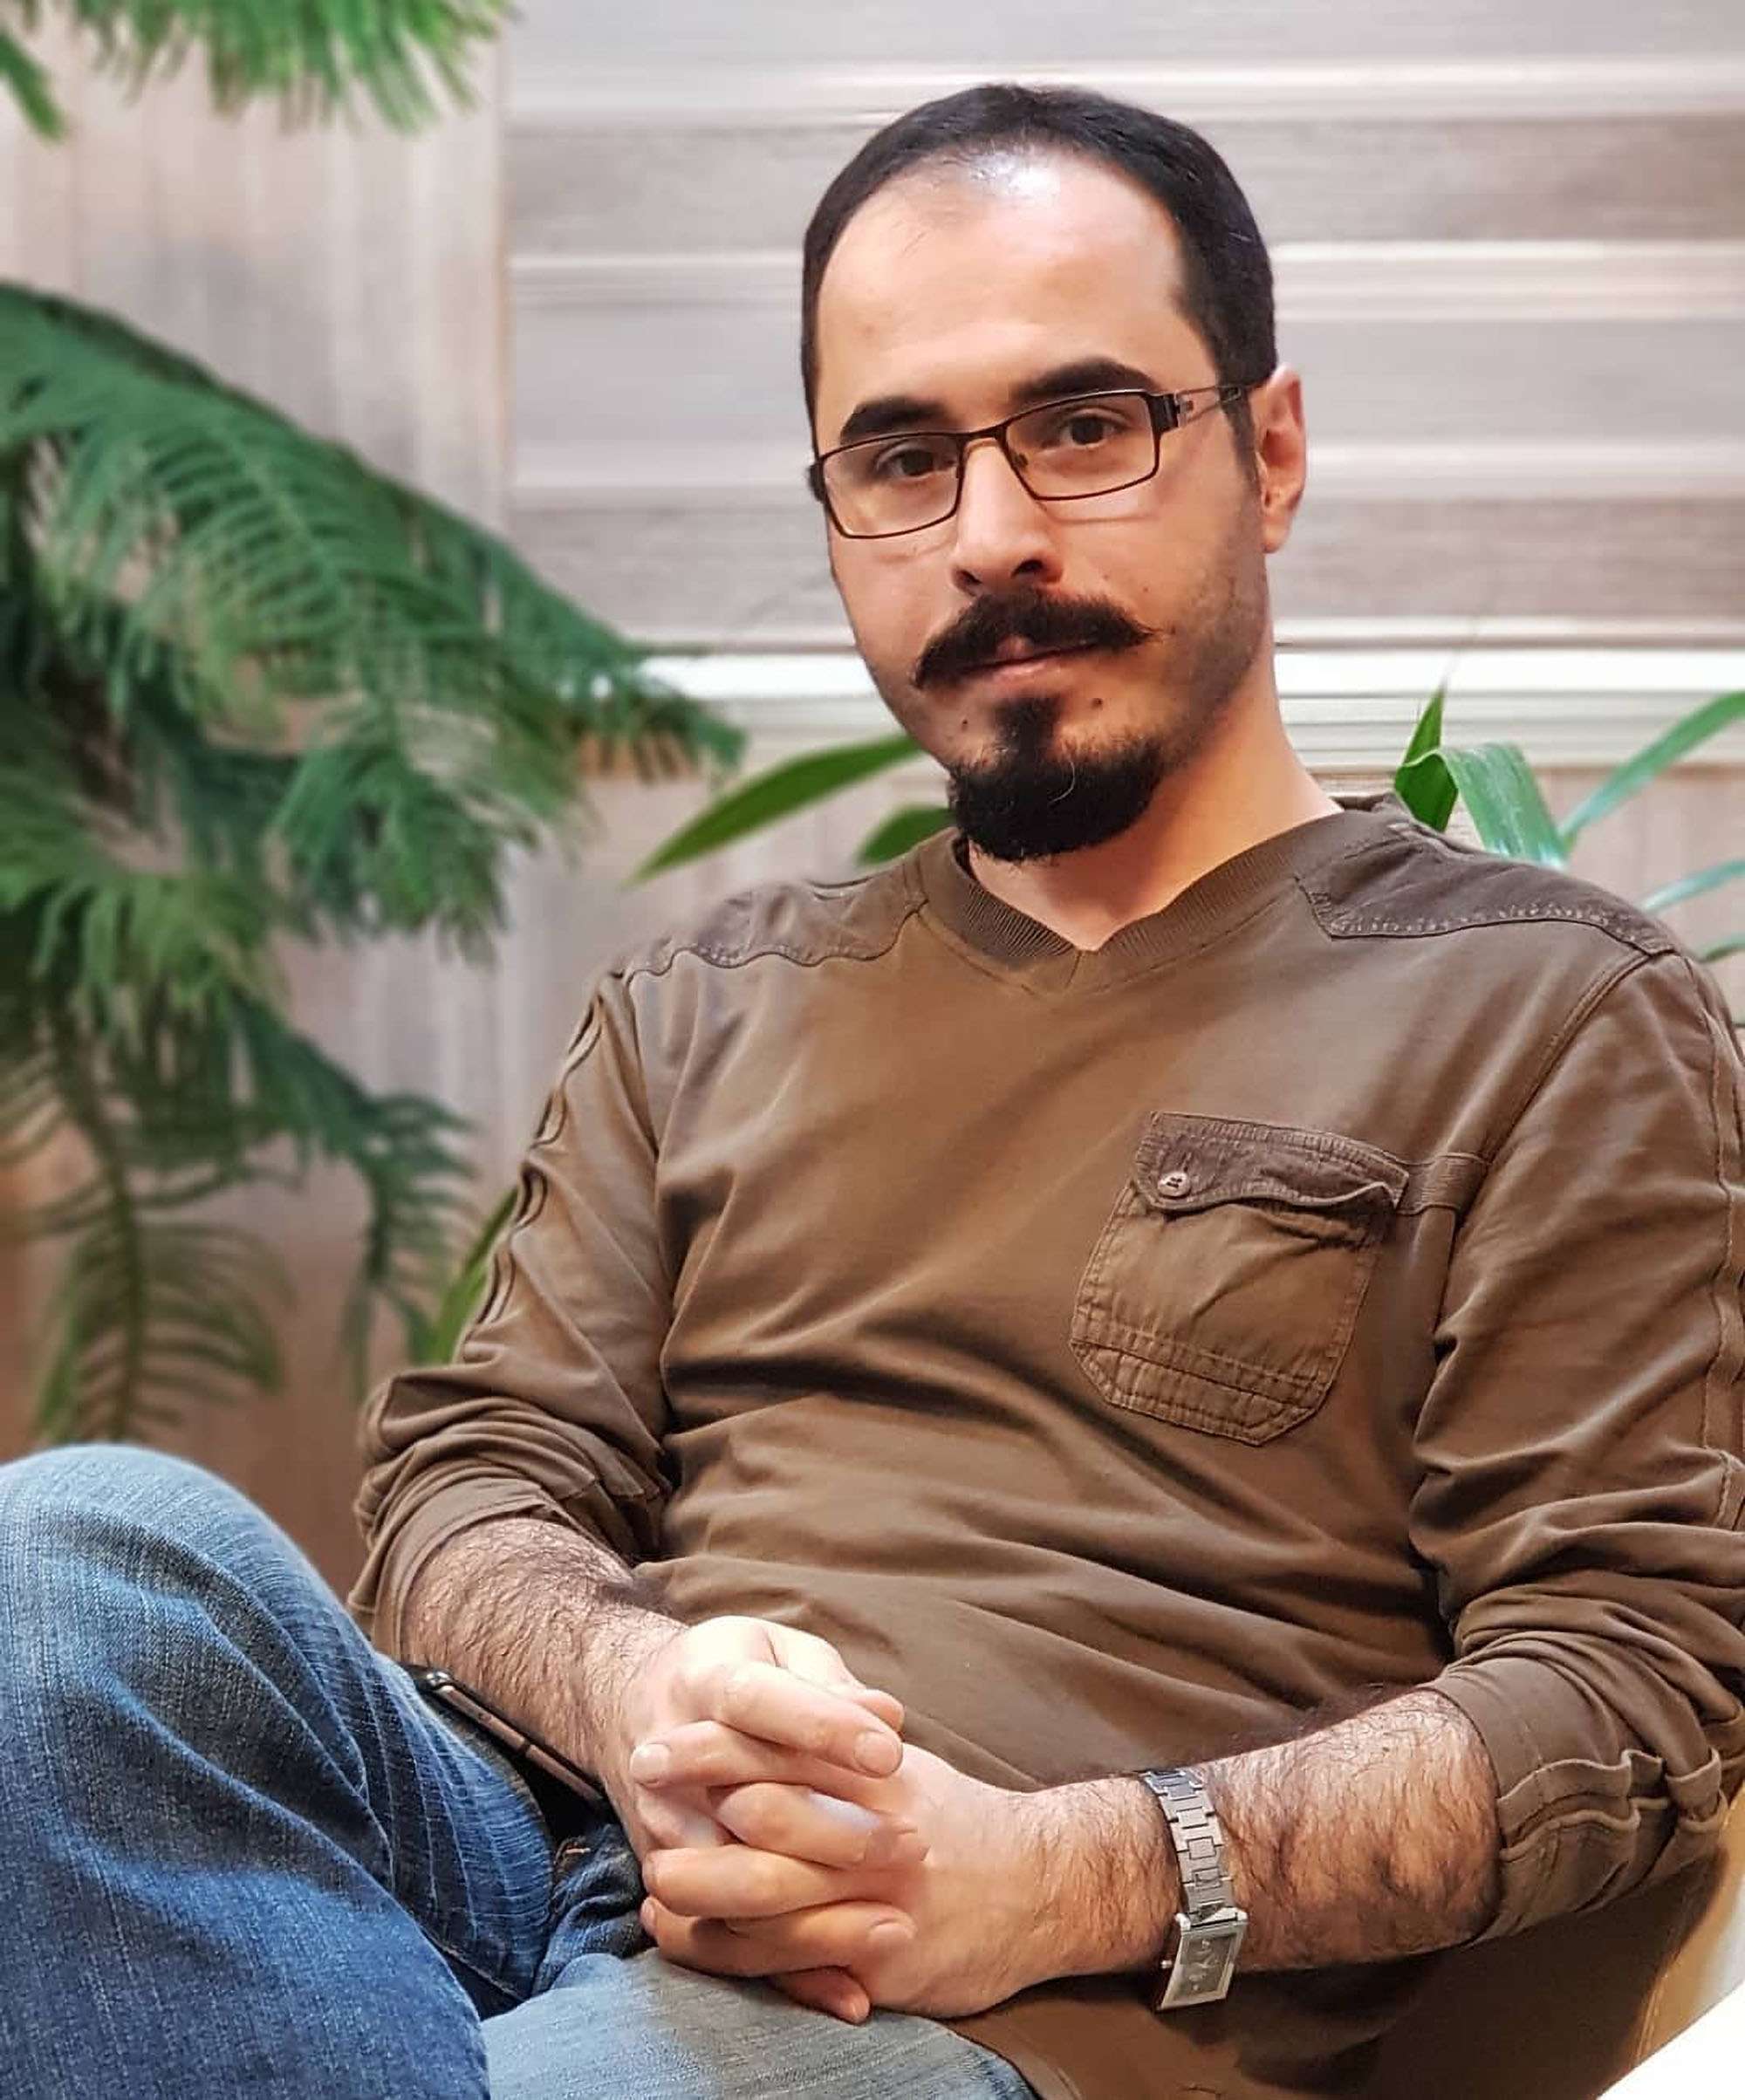 Read more about the article LEGS BROKEN: Jailed Iranian Journalist In Desperate Need Of Meds After Being Tortured And Legs Broken For Commenting On Protests